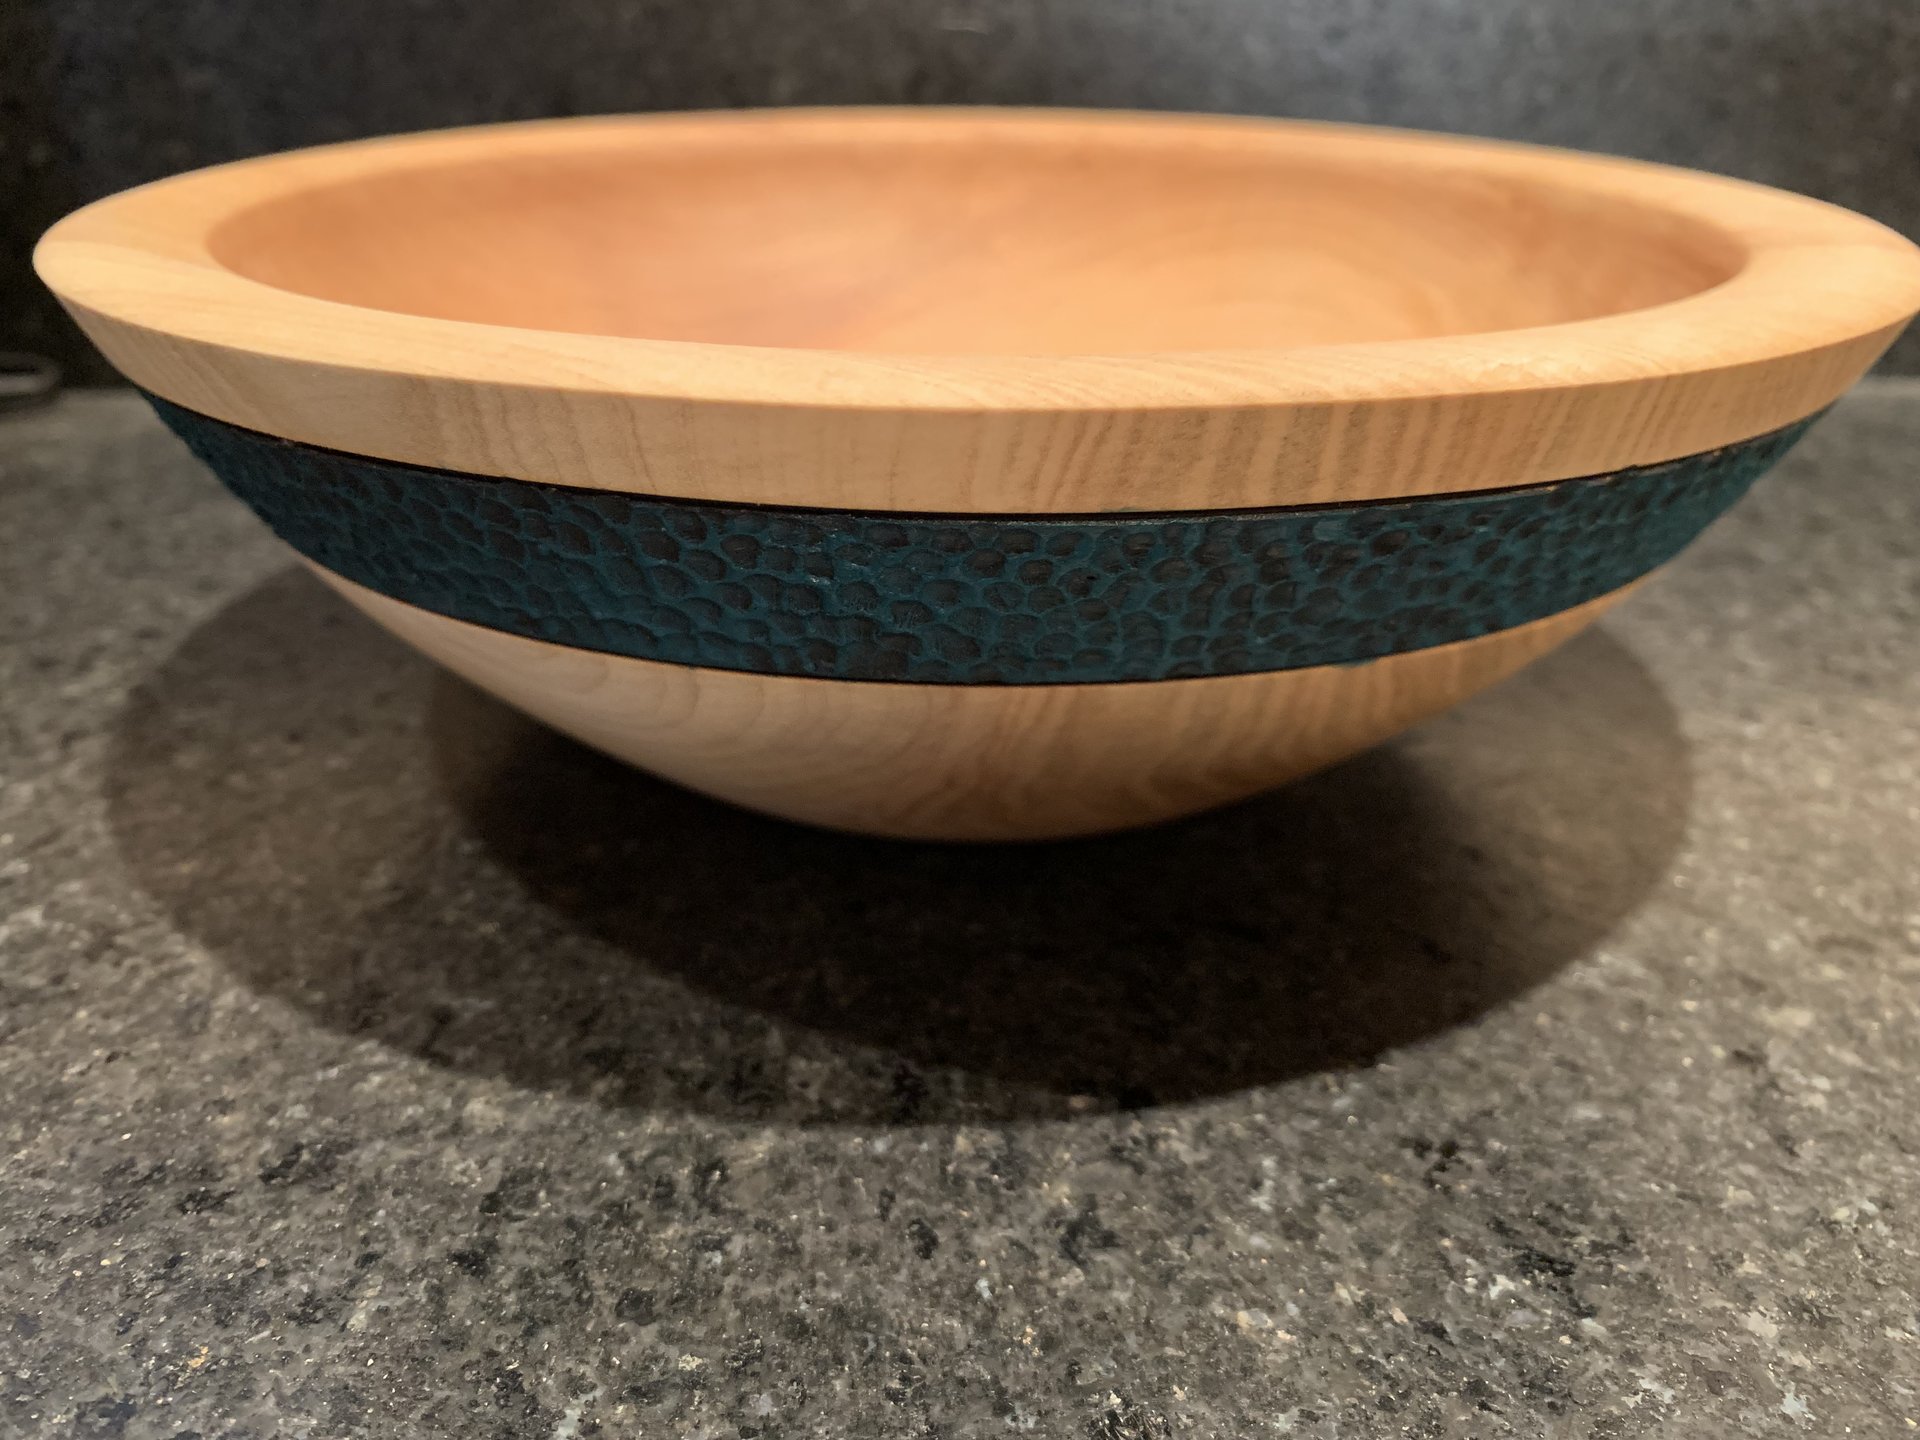 Bowl with band